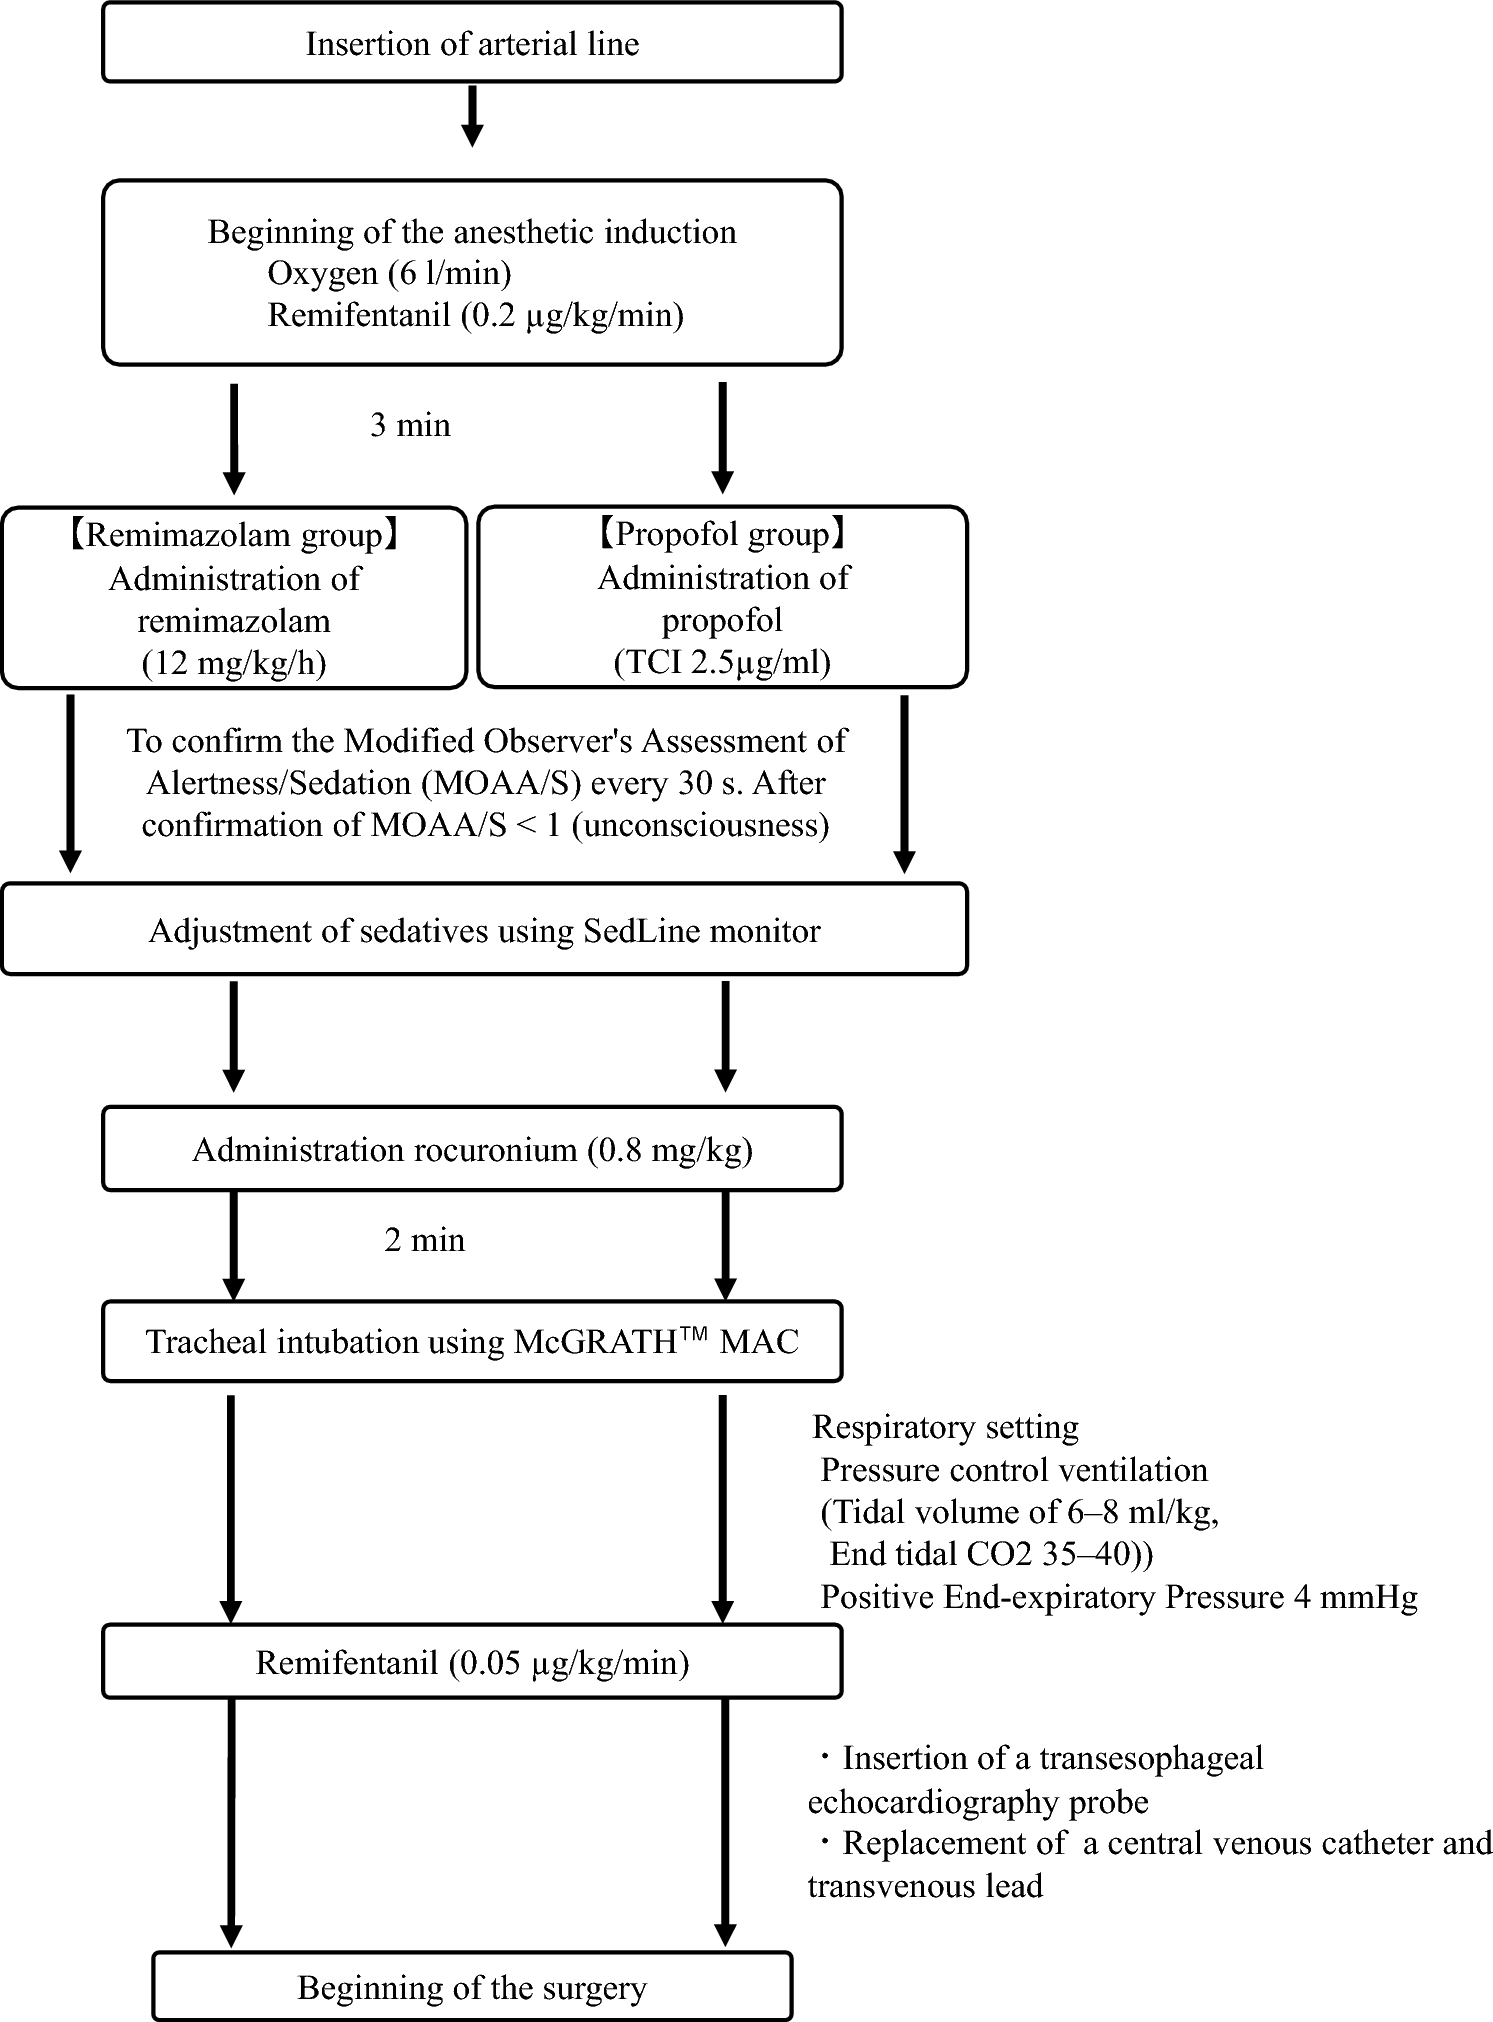 Comparison of remimazolam-based and propofol-based total intravenous anesthesia on hemodynamics during anesthesia induction in patients undergoing transcatheter aortic valve replacement: a randomized controlled trial